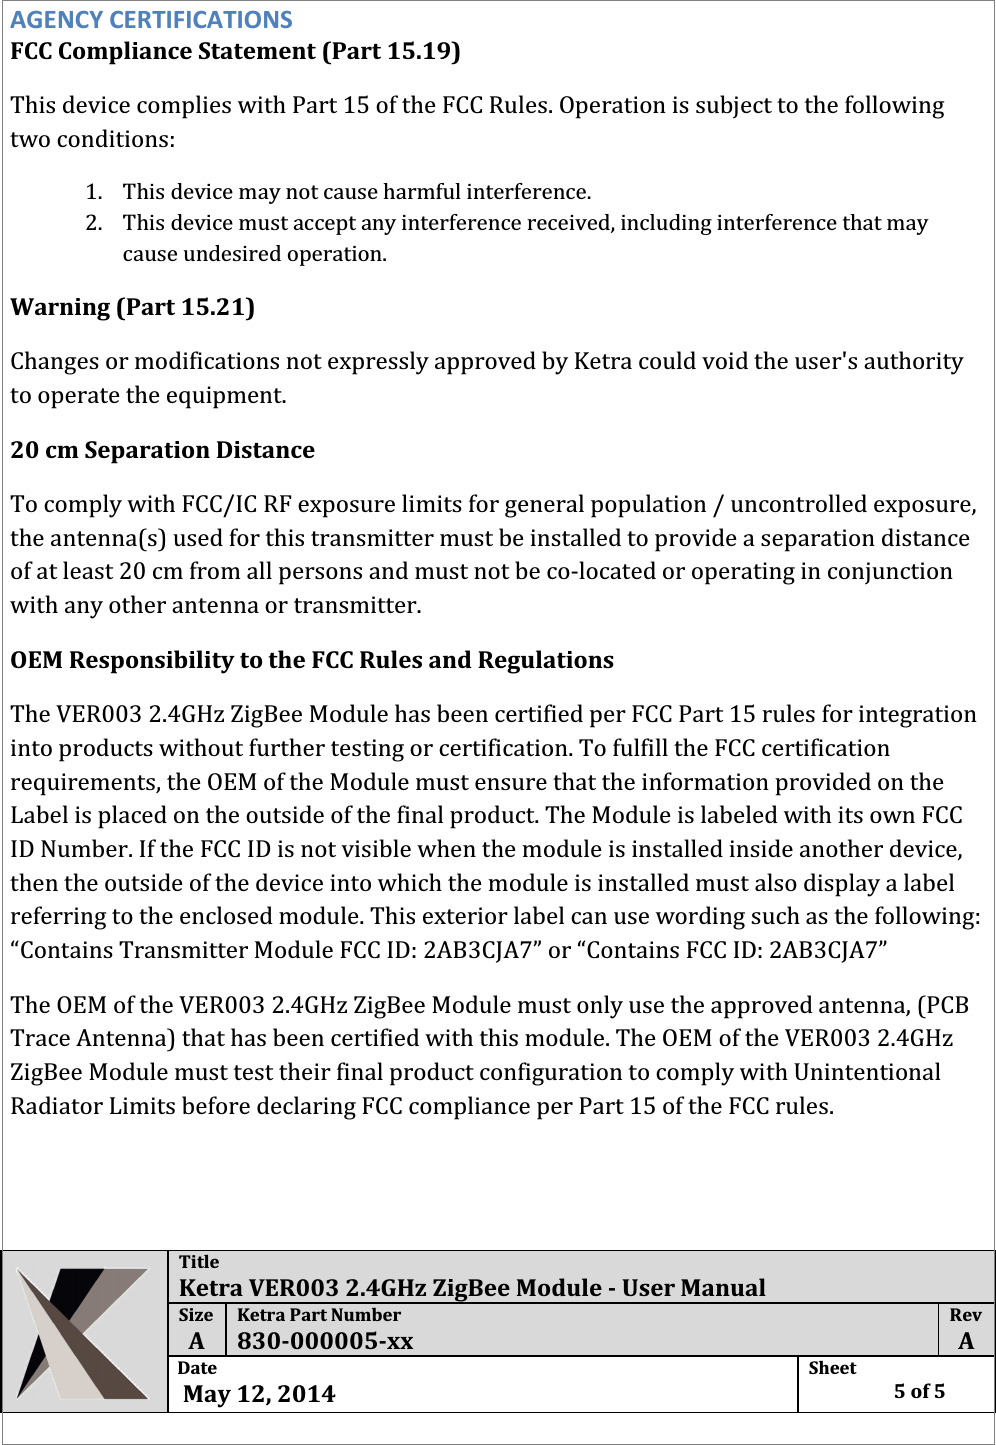  Title Ketra VER003 2.4GHz ZigBee Module - User Manual Size  A Ketra Part Number 830-000005-xx Rev  A Date   May 12, 2014 Sheet    5 of 5  AGENCY CERTIFICATIONS FCC Compliance Statement (Part 15.19)  This device complies with Part 15 of the FCC Rules. Operation is subject to the following two conditions: 1. This device may not cause harmful interference. 2. This device must accept any interference received, including interference that may cause undesired operation. Warning (Part 15.21) Changes or modifications not expressly approved by Ketra could void the user&apos;s authority to operate the equipment. 20 cm Separation Distance To comply with FCC/IC RF exposure limits for general population / uncontrolled exposure, the antenna(s) used for this transmitter must be installed to provide a separation distance of at least 20 cm from all persons and must not be co-located or operating in conjunction with any other antenna or transmitter. OEM Responsibility to the FCC Rules and Regulations The VER003 2.4GHz ZigBee Module has been certified per FCC Part 15 rules for integration into products without further testing or certification. To fulfill the FCC certification requirements, the OEM of the Module must ensure that the information provided on the Label is placed on the outside of the final product. The Module is labeled with its own FCC ID Number. If the FCC ID is not visible when the module is installed inside another device, then the outside of the device into which the module is installed must also display a label referring to the enclosed module. This exterior label can use wording such as the following: “Contains Transmitter Module FCC ID: 2AB3CJA7” or “Contains FCC ID: 2AB3CJA7” The OEM of the VER003 2.4GHz ZigBee Module must only use the approved antenna, (PCB Trace Antenna) that has been certified with this module. The OEM of the VER003 2.4GHz ZigBee Module must test their final product configuration to comply with Unintentional Radiator Limits before declaring FCC compliance per Part 15 of the FCC rules.  